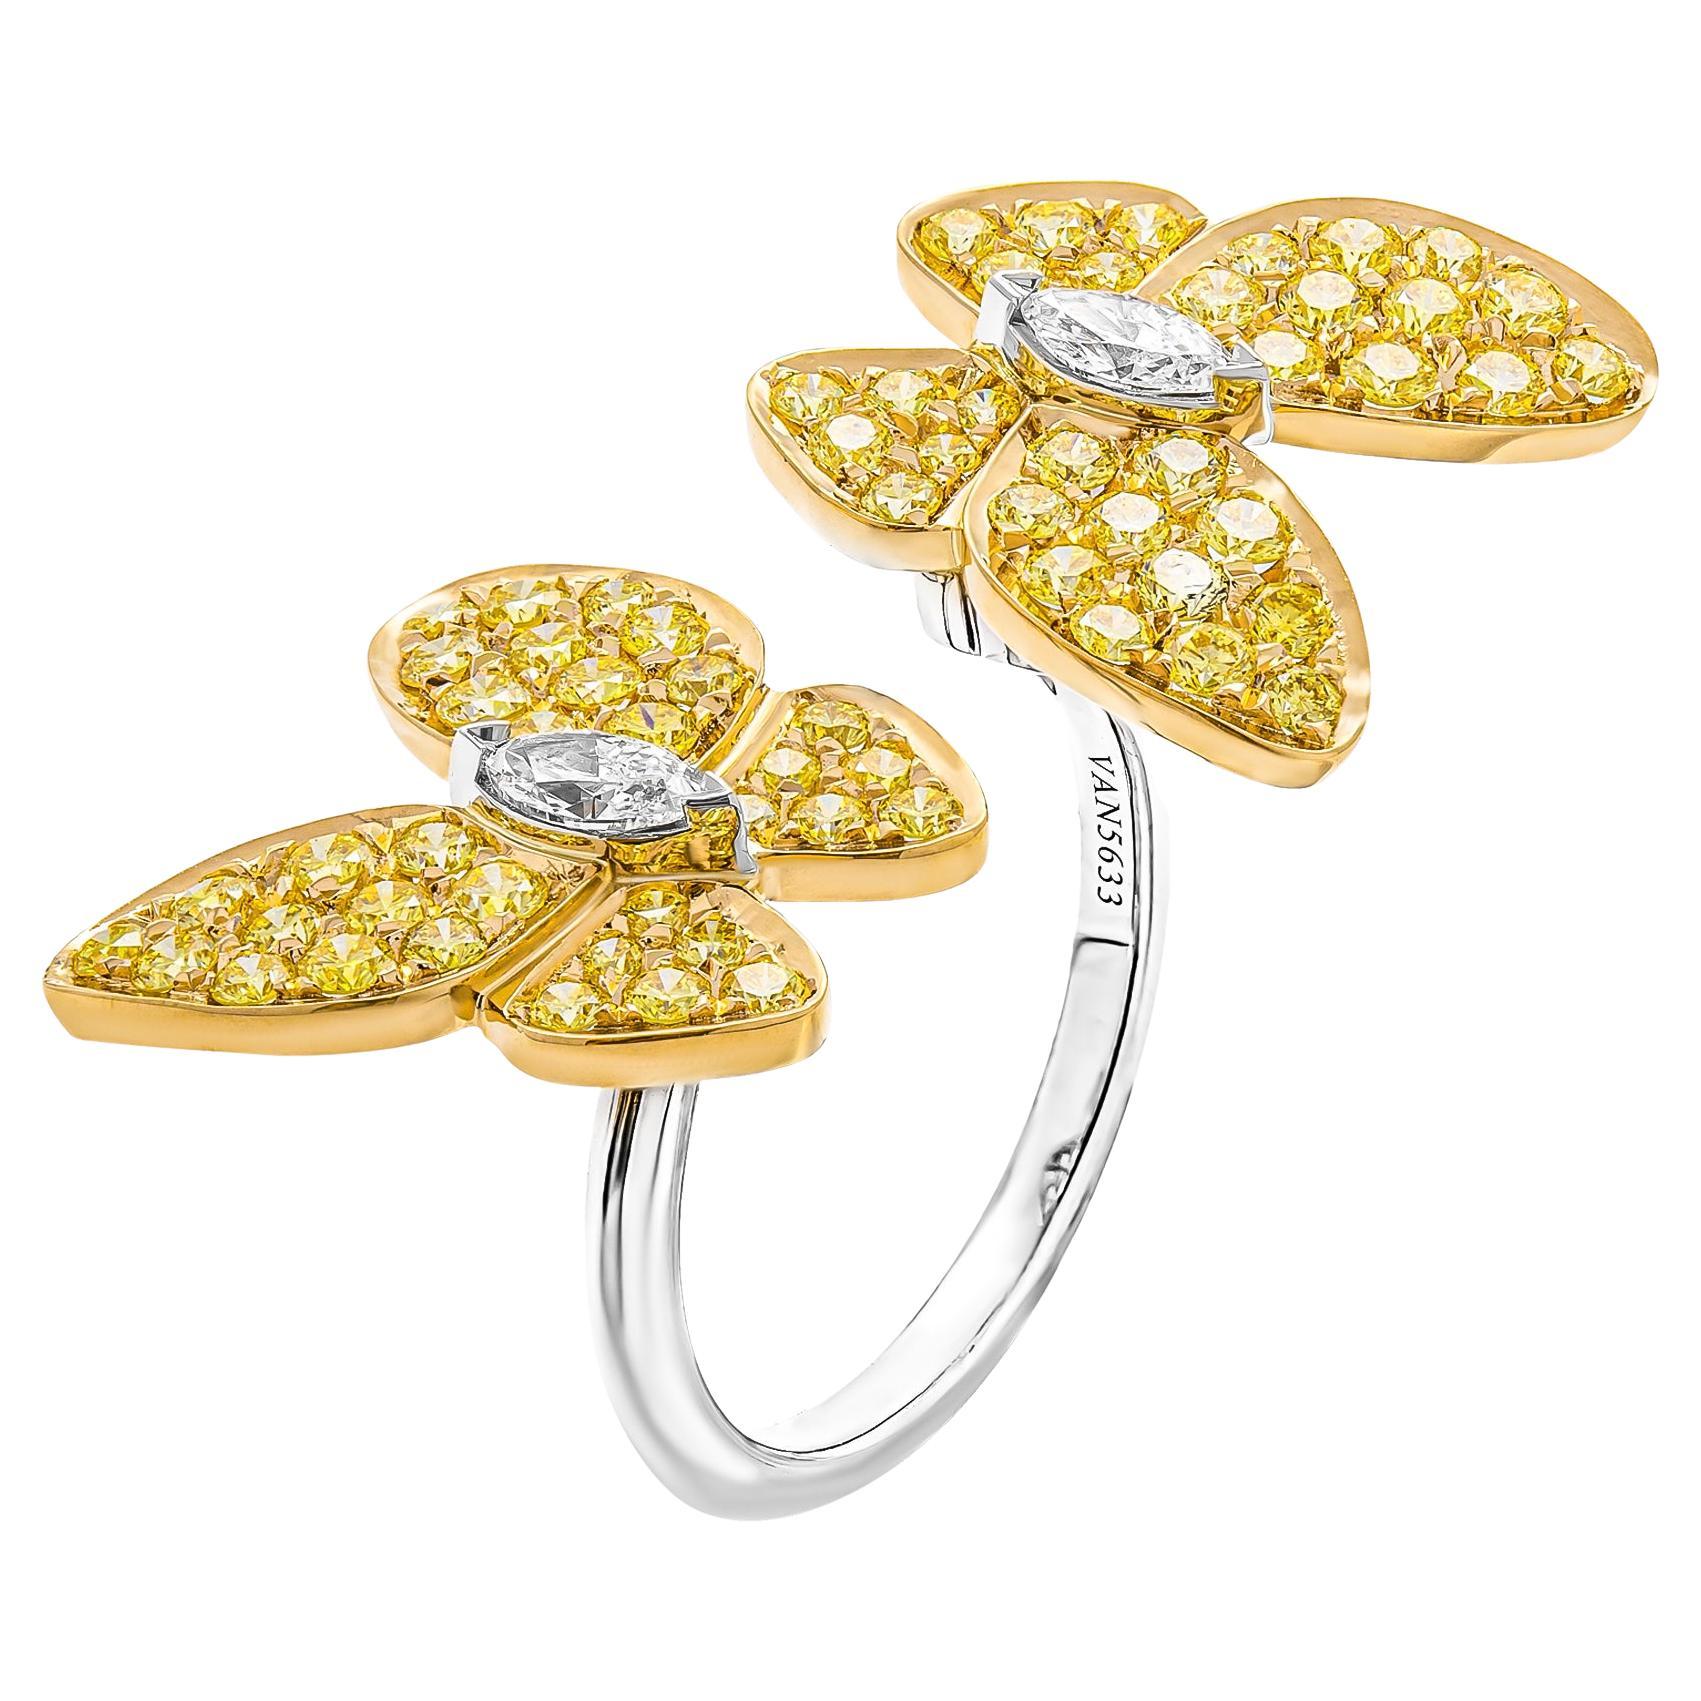 Butterfly Ring in 18K Yellow Gold & 18K White Gold